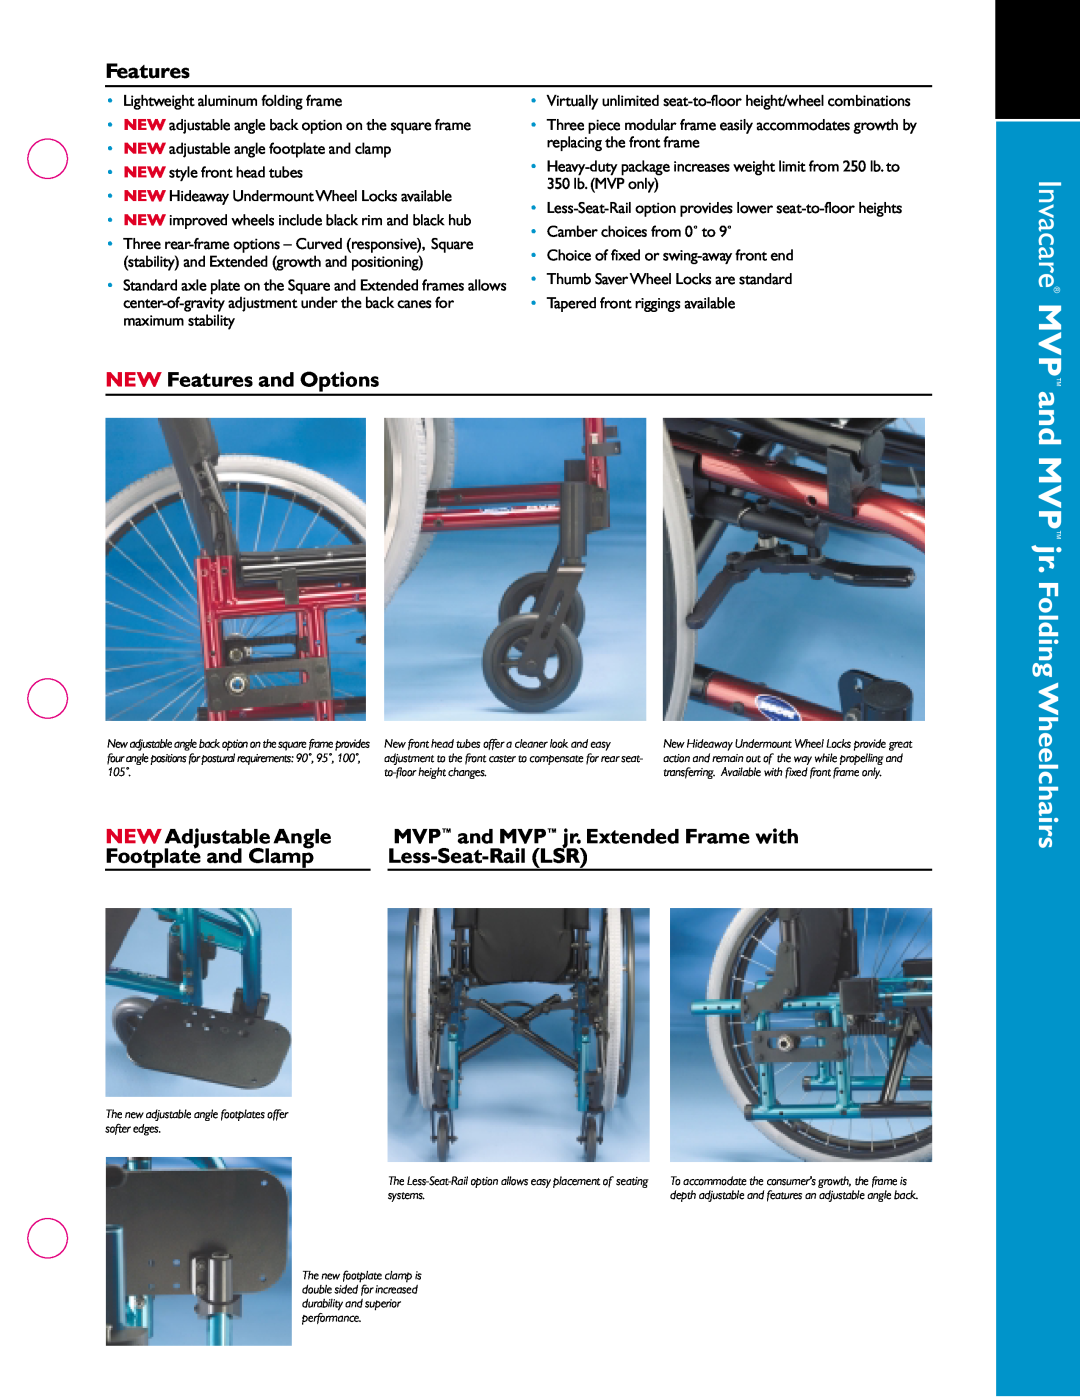 Invacare manual and MVP jr. Folding Wheelchairs, NEW Features and Options, NEW Adjustable Angle, Footplate and Clamp 